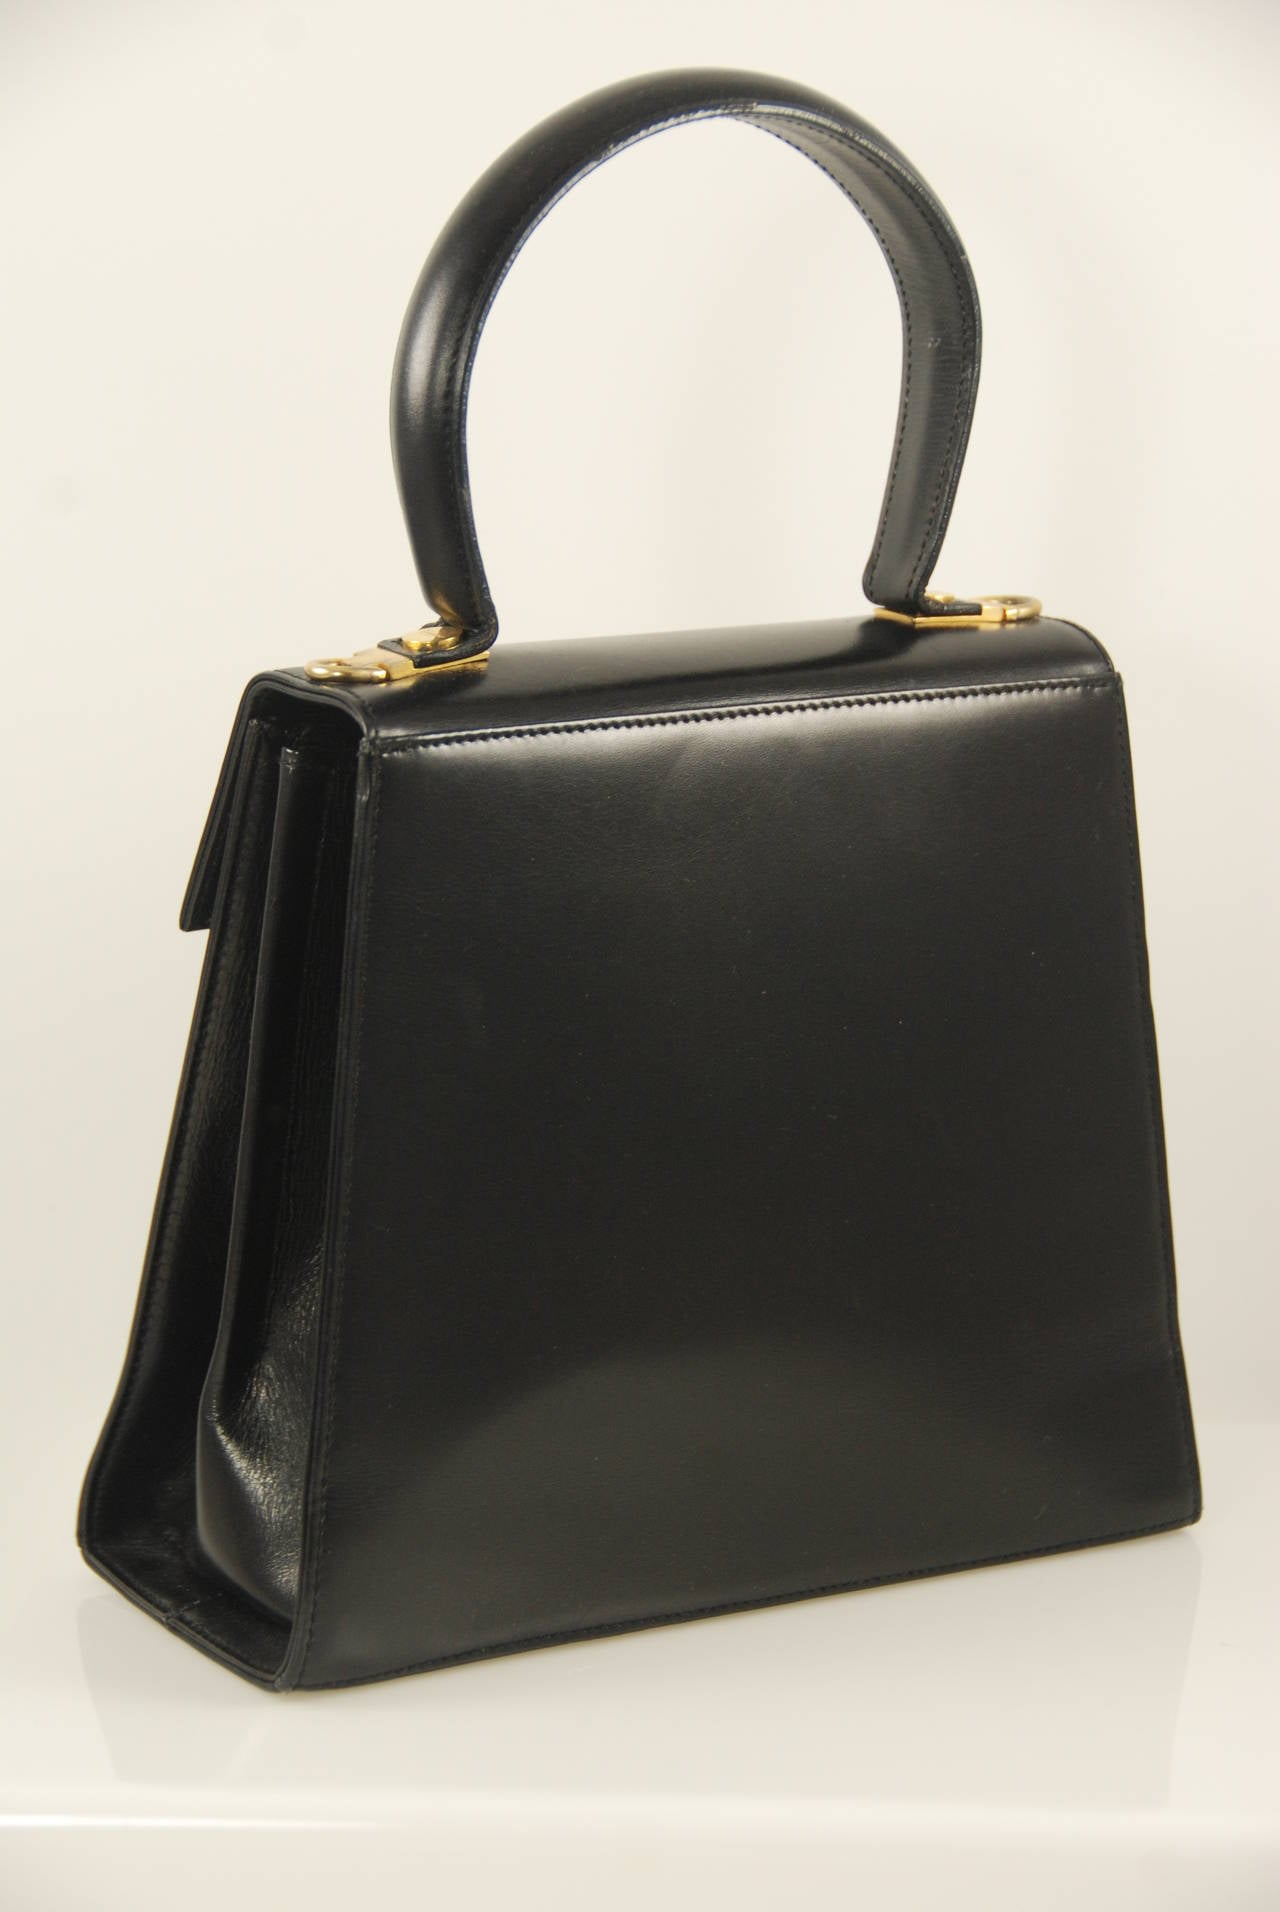 Wonderful classic black leather Ferragamo handbag. Also included is the detachable shoulder strap. Inside the bag has two main compartments and one zipper compartment. Lining is a smooth black leather.